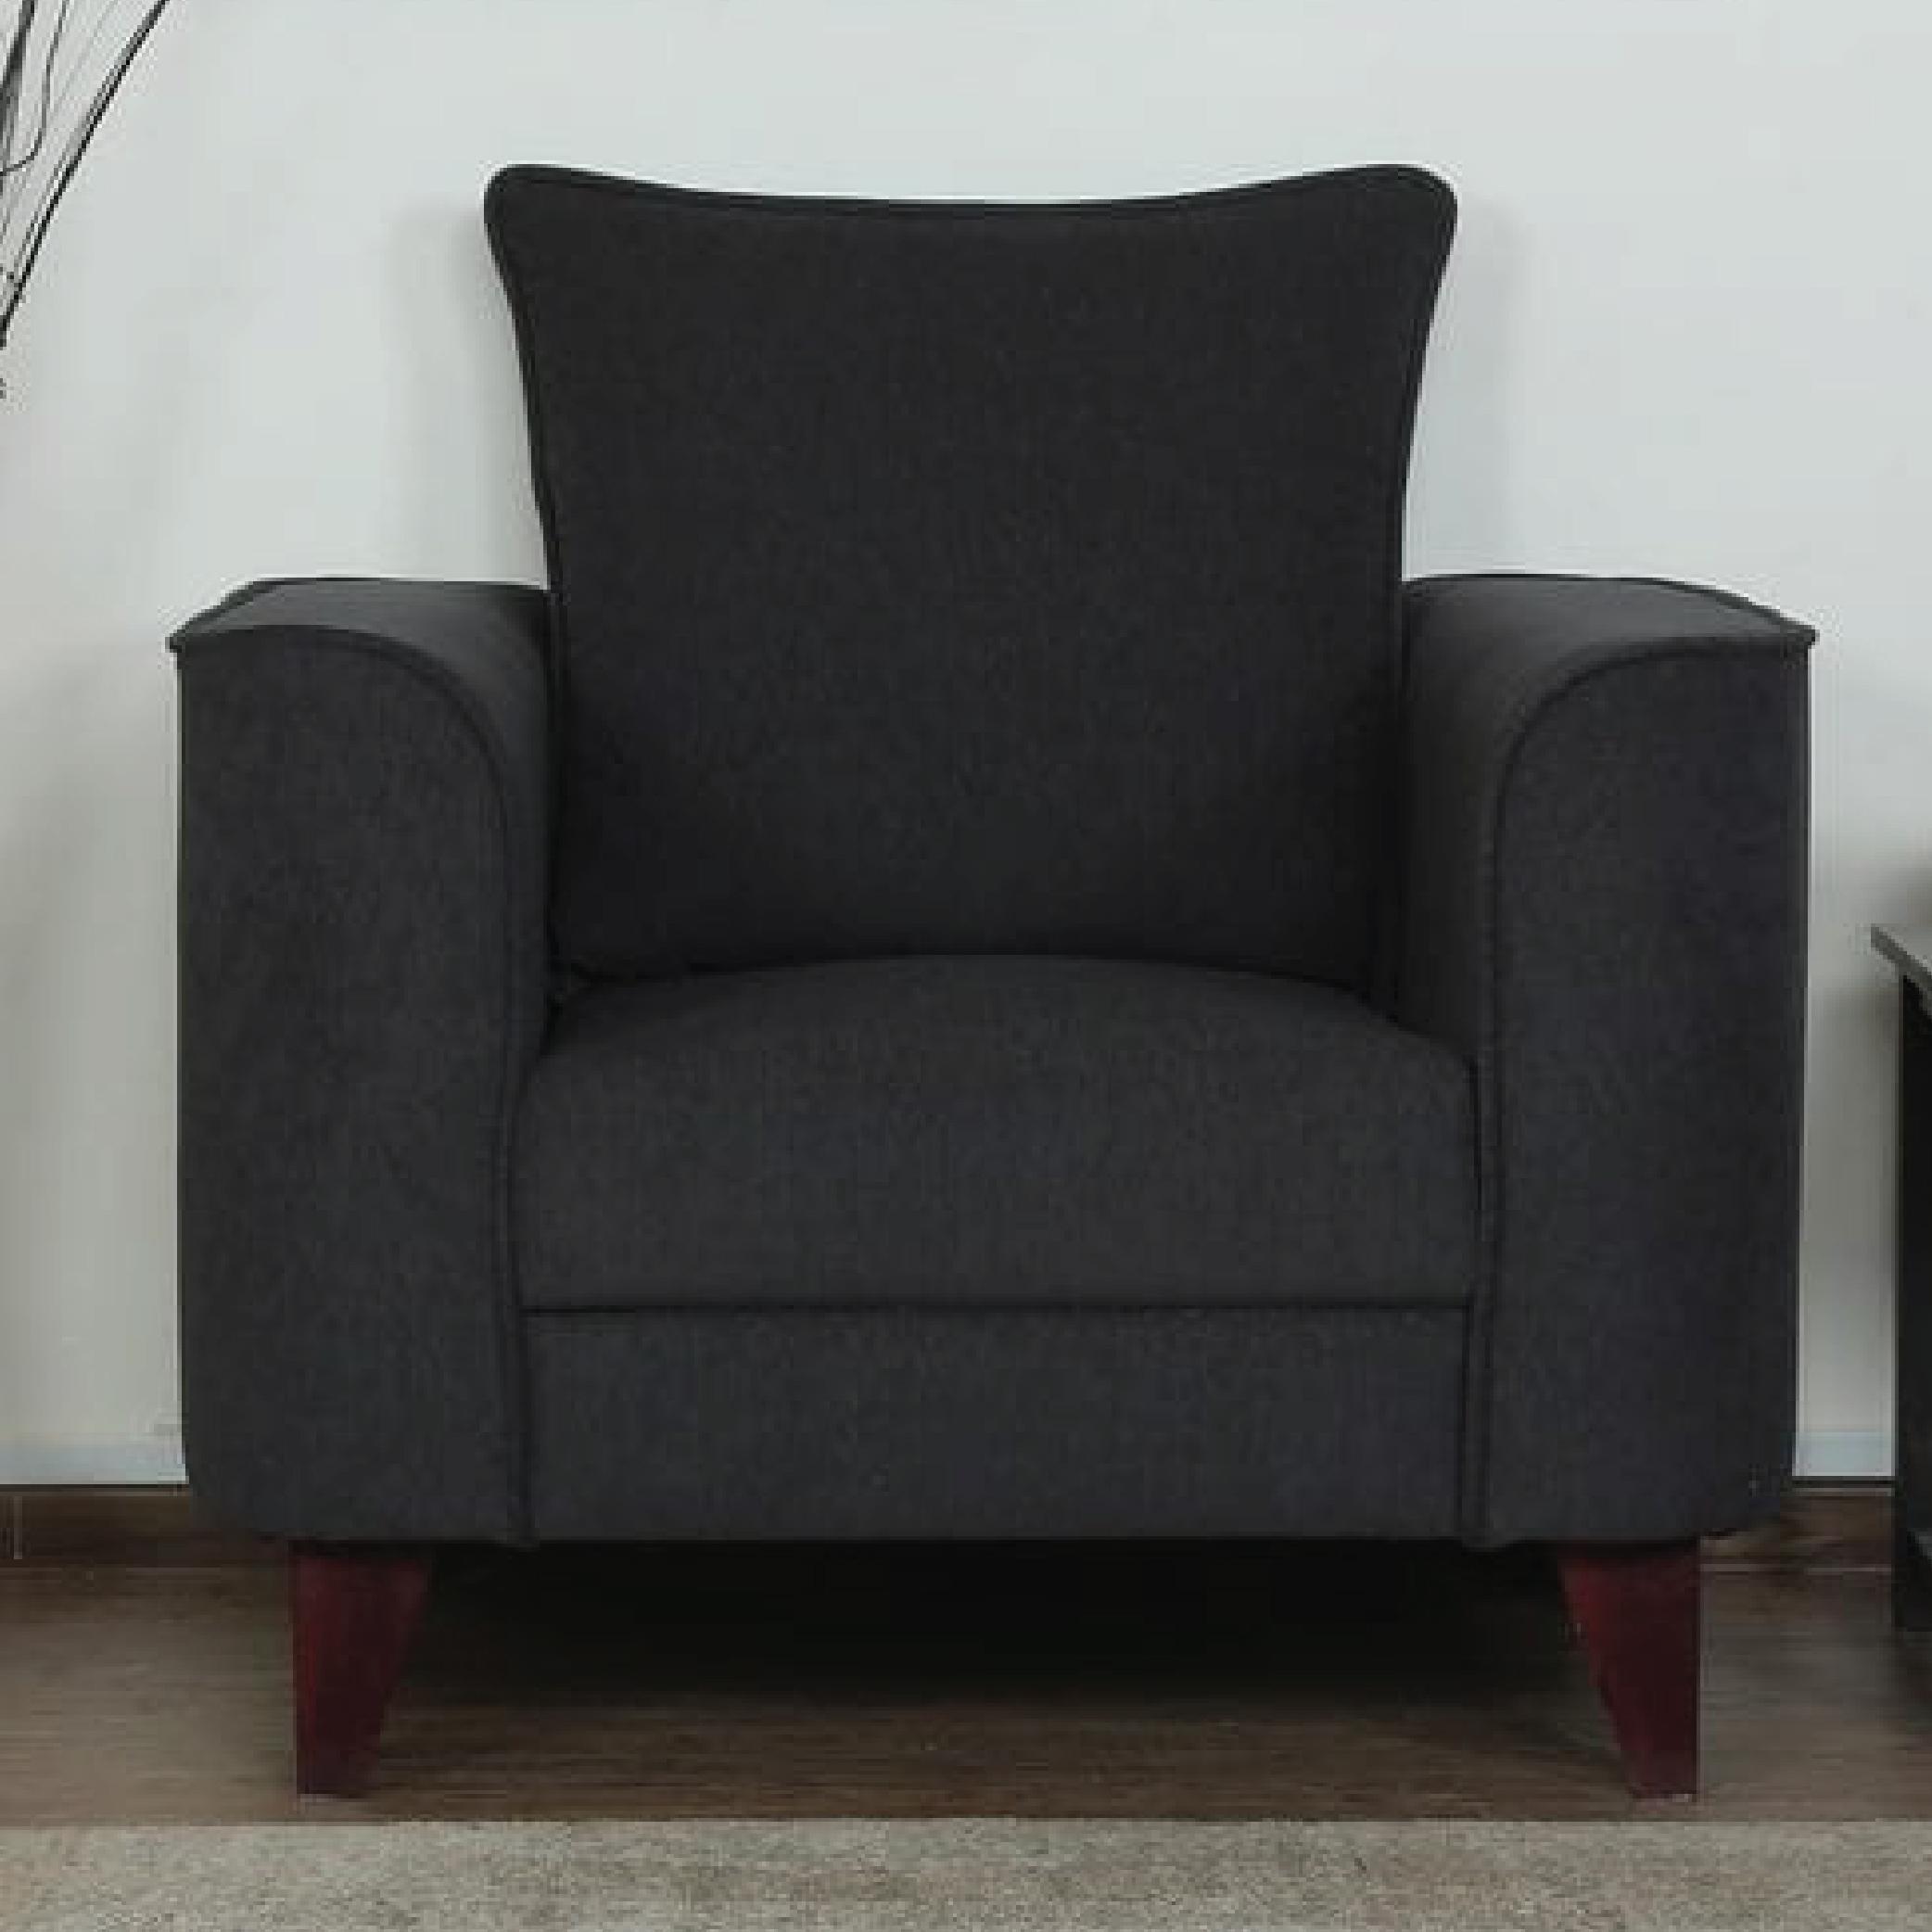 Sessa One Seater Sofa in Charcoal Grey Colour